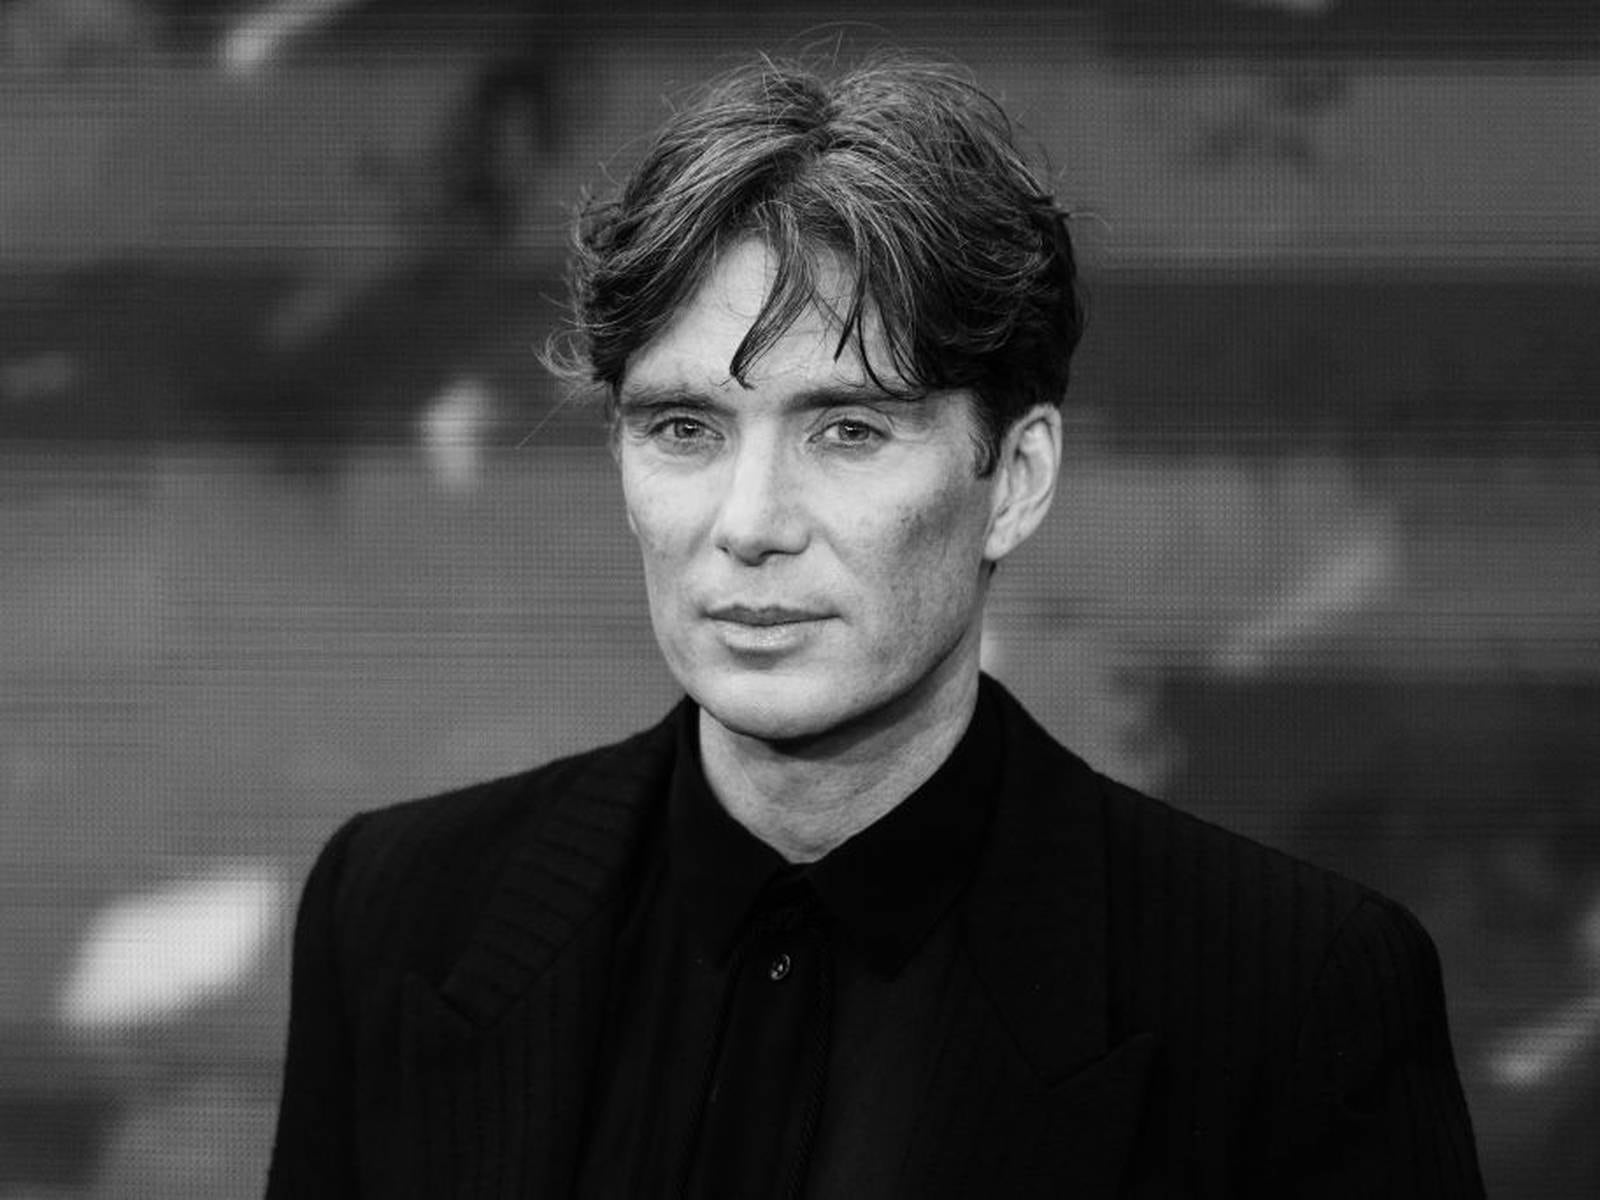 Hollywood star Cillian Murphy's incredible response after fans